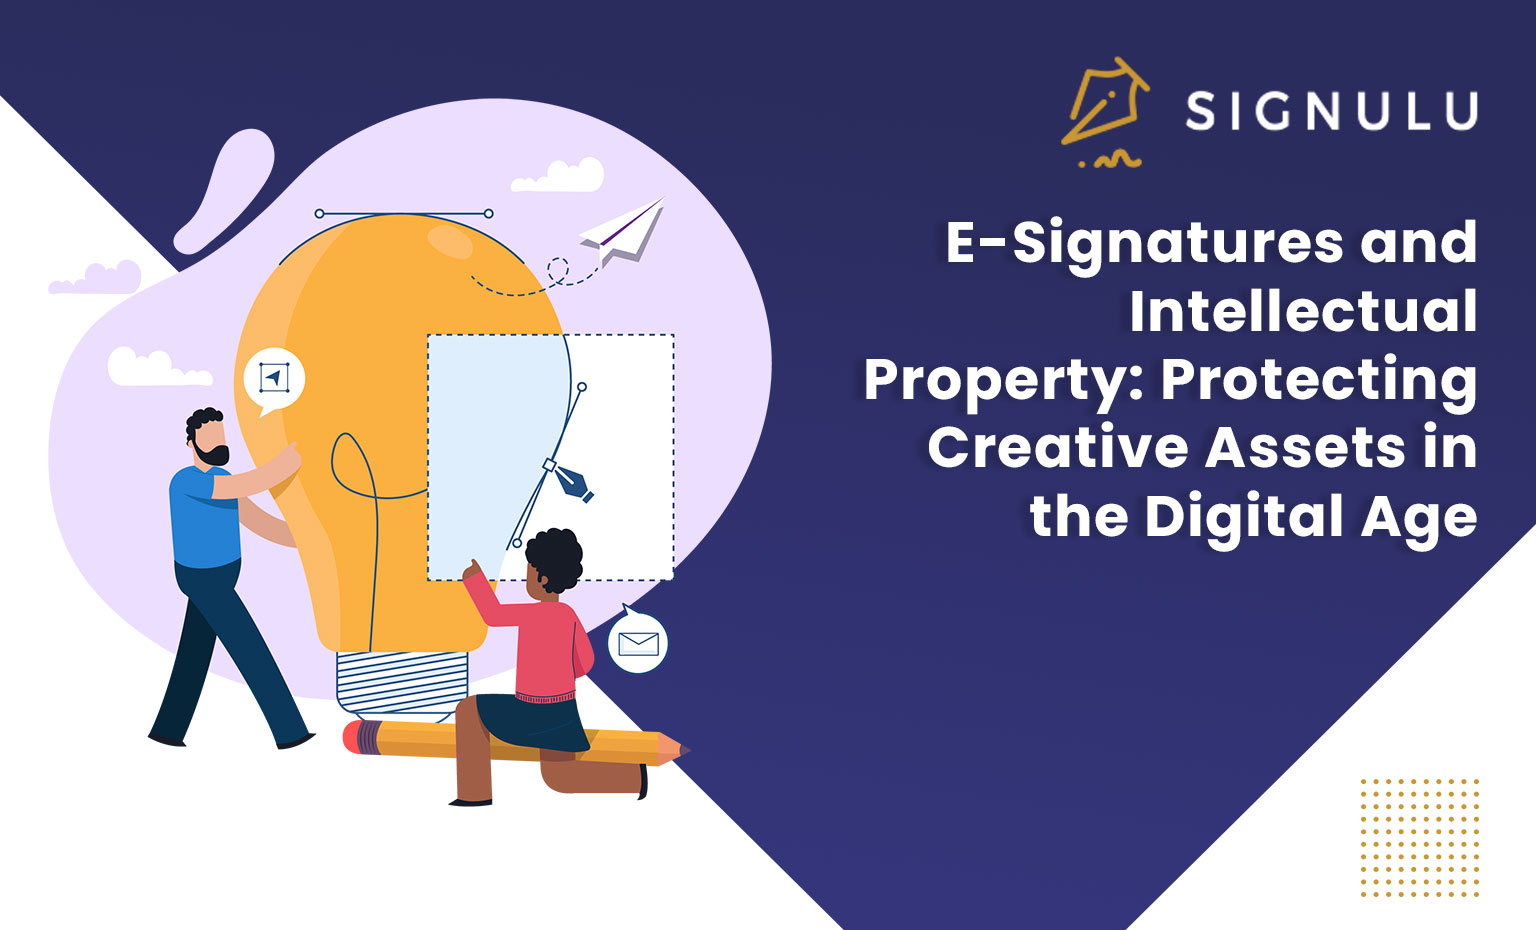 E-Signatures and Intellectual Property: Protecting Creative Assets in the Digital Age